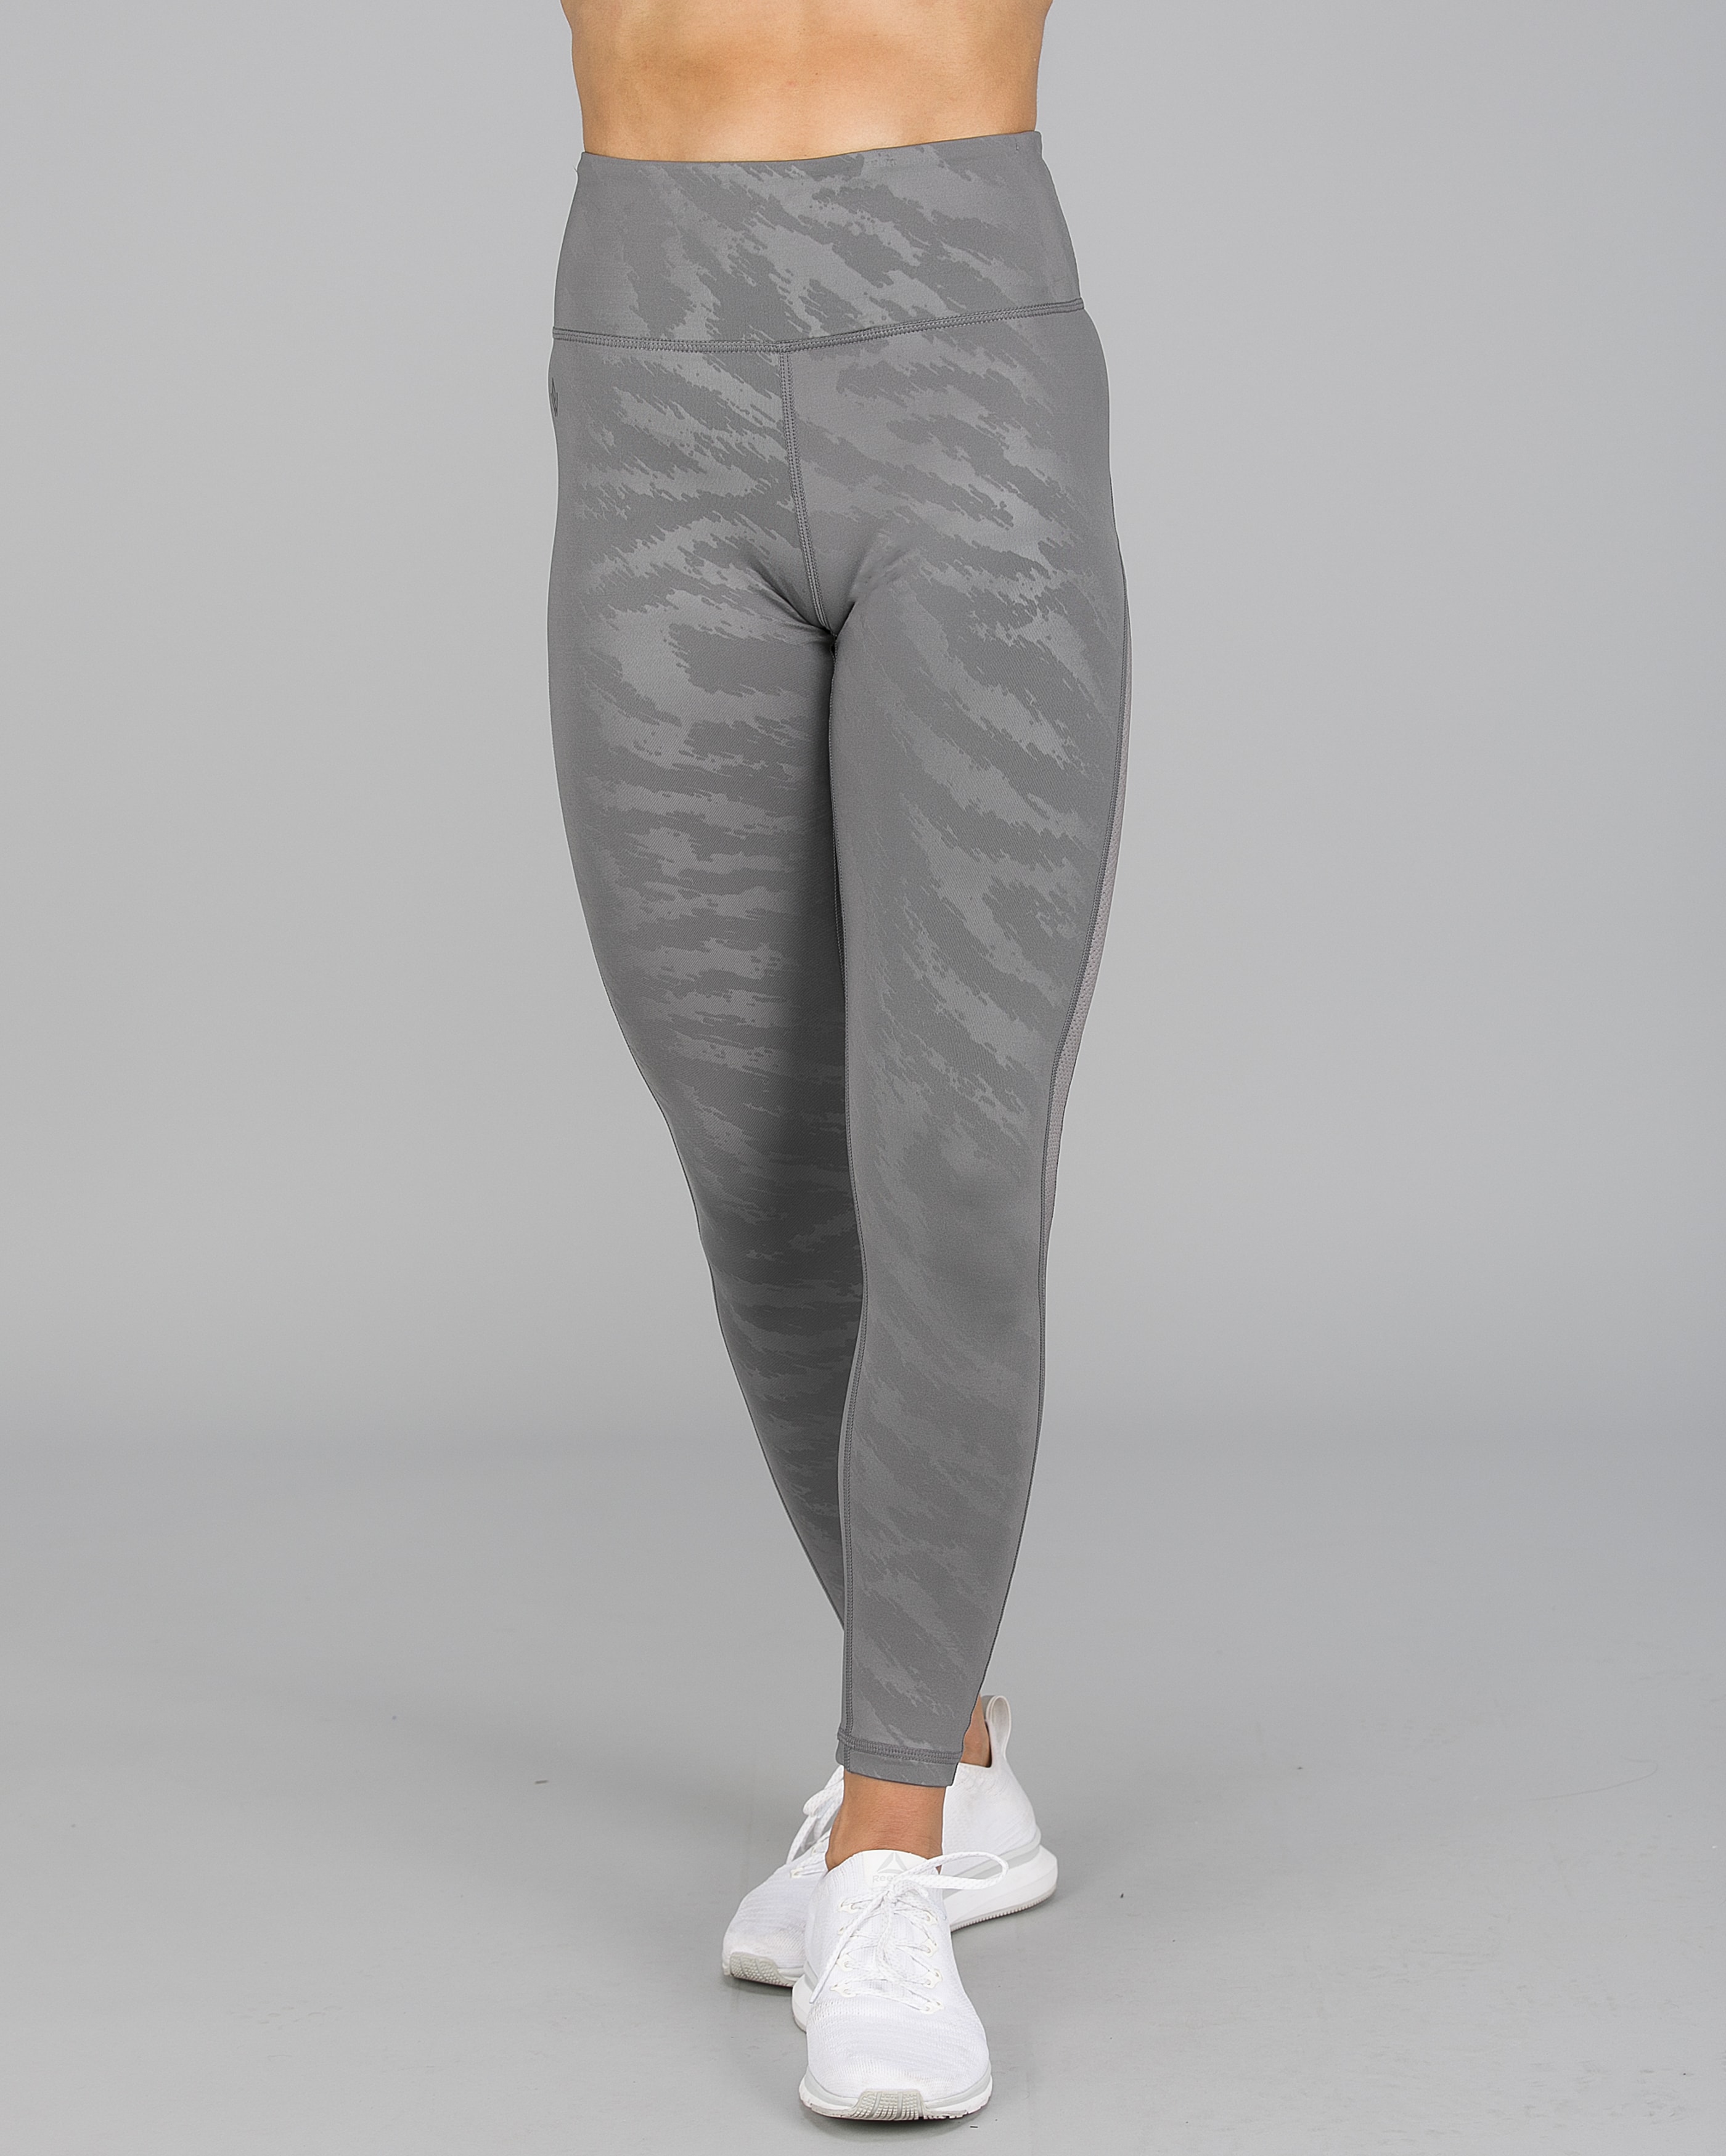  Silver workout leggings for Fat Body